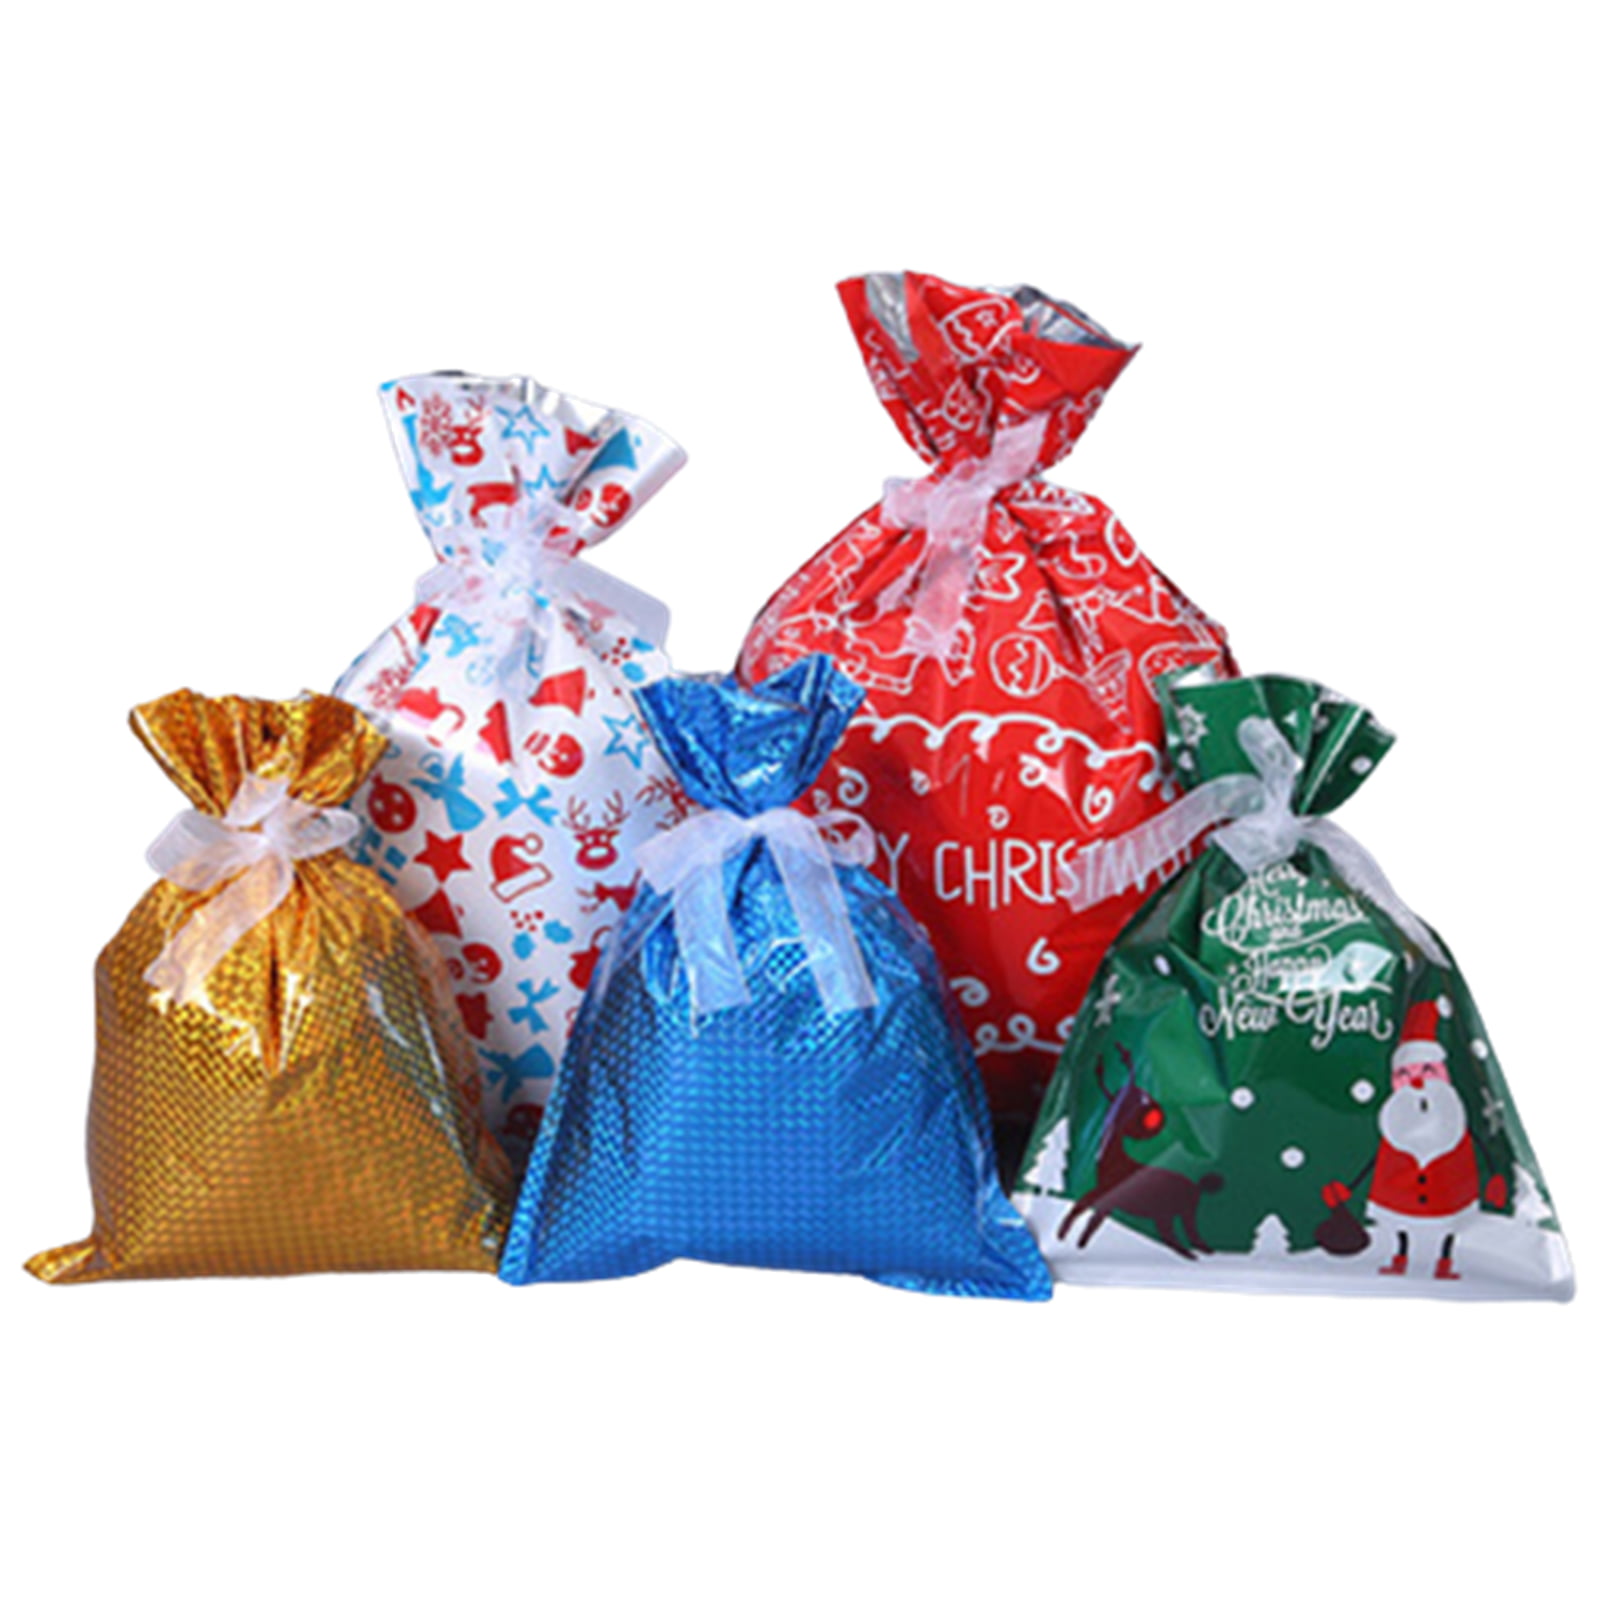 Foil Drawstring Bag Christmas Gift Bags Empty Wrapping Pouch Xmas Supplies